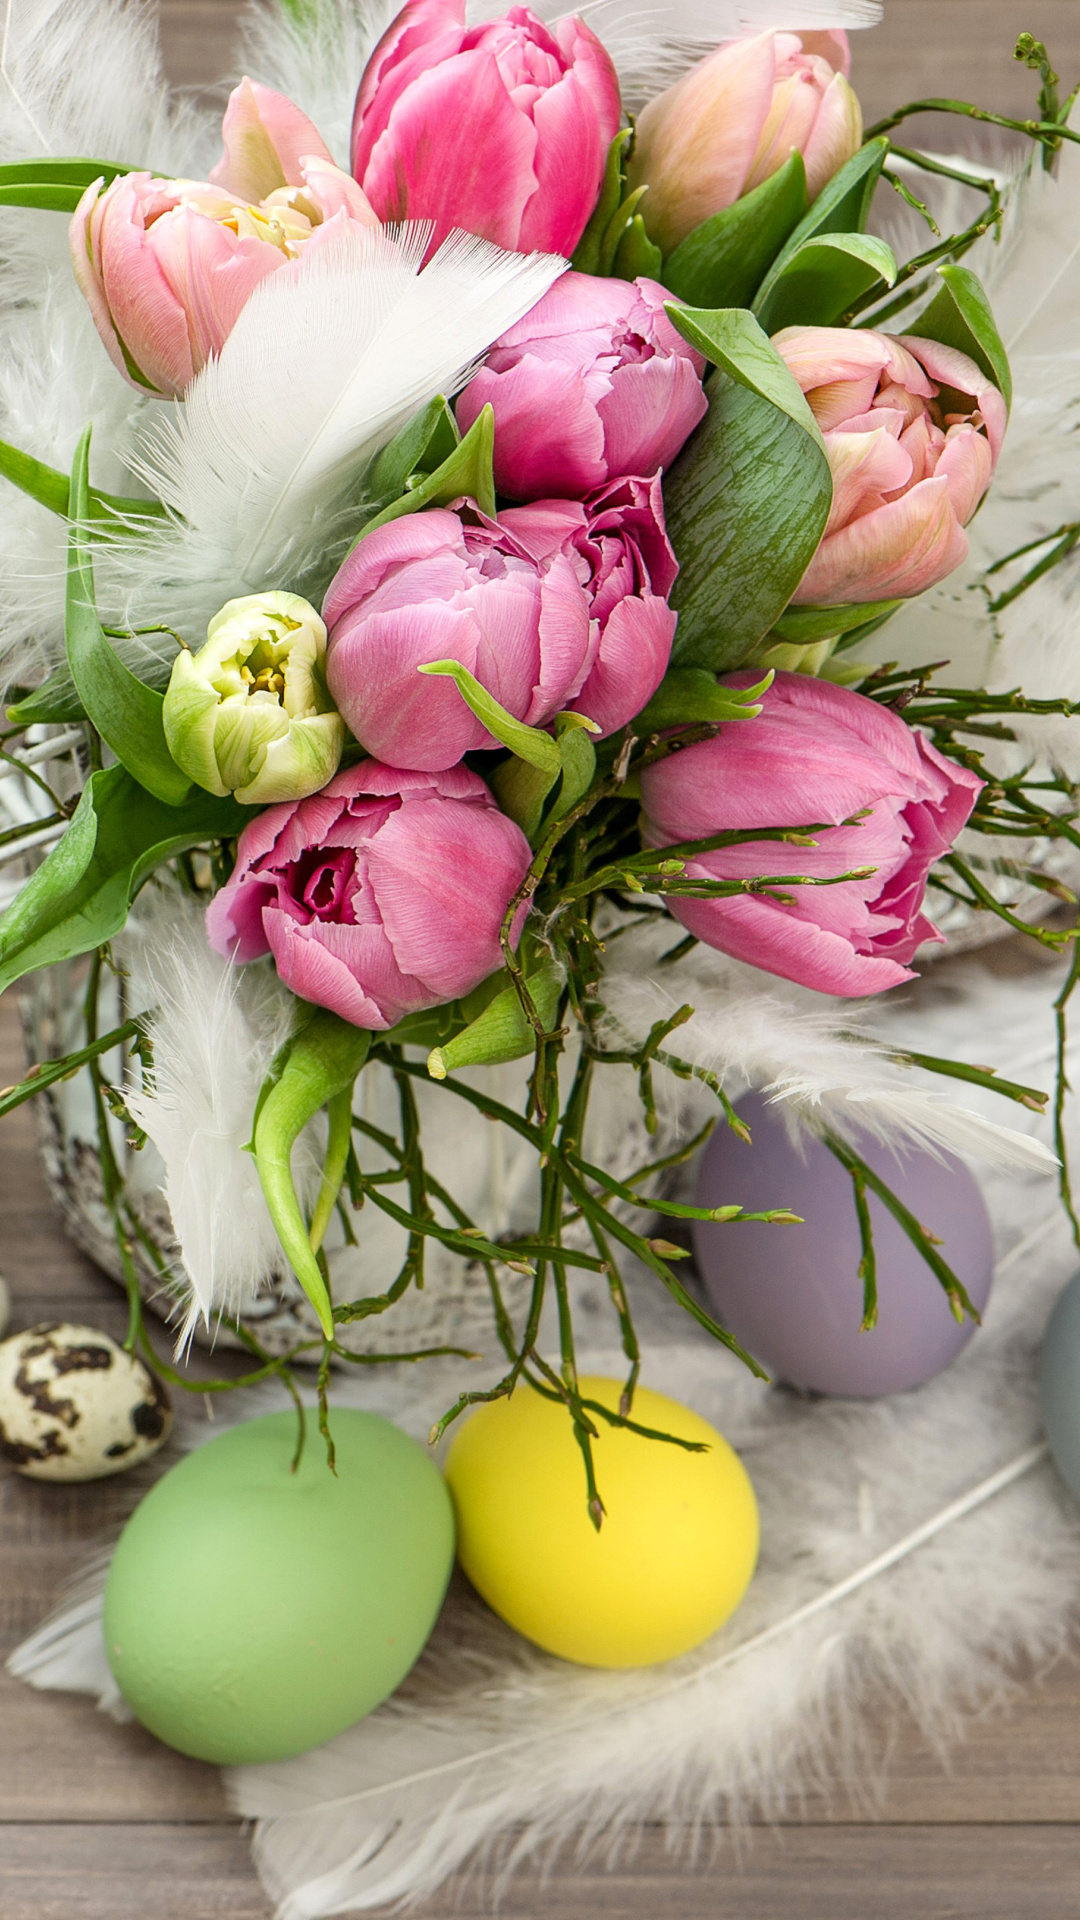 Das Tulips and Easter Eggs Wallpaper 1080x1920